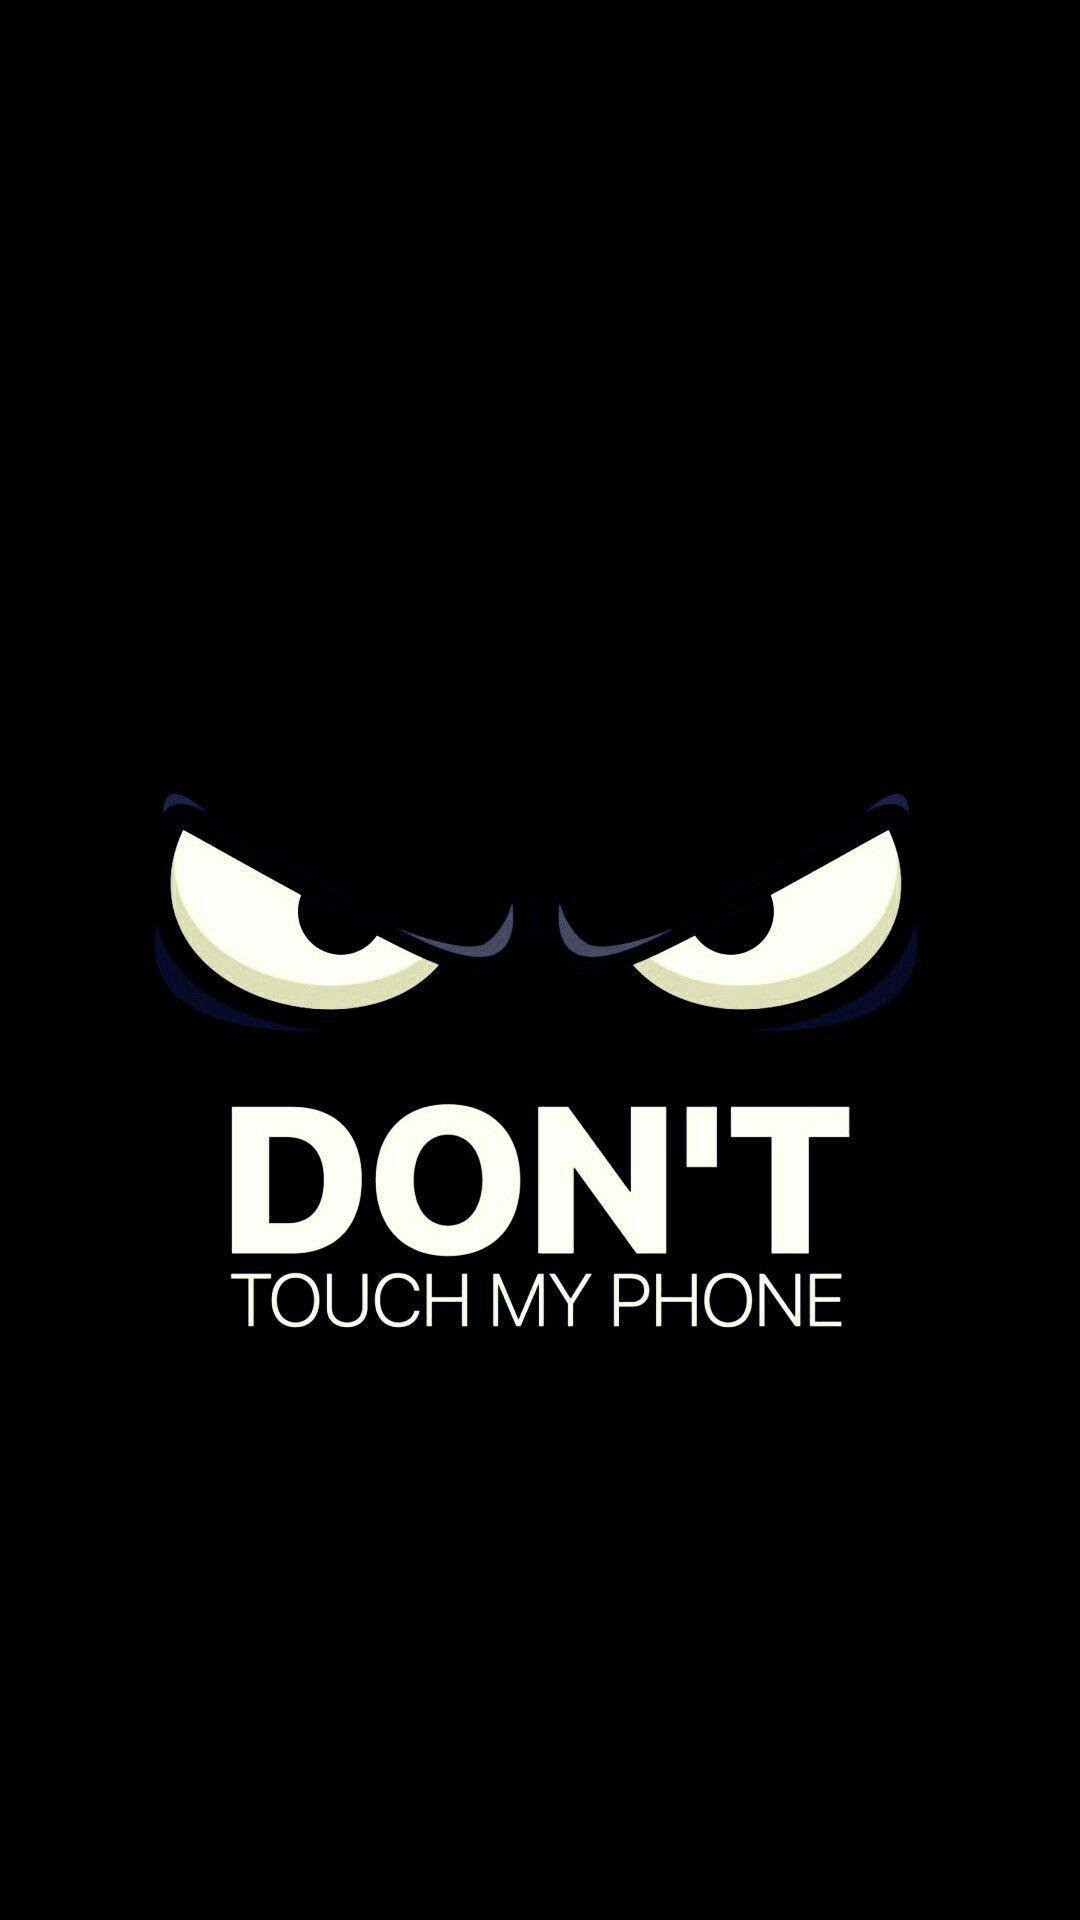 Get Off My Phone Wallpaper Discover more Aesthetic Android Background  Iphone Lock Screen wa  Iphone wallpaper quotes funny Phone humor Funny phone  wallpaper